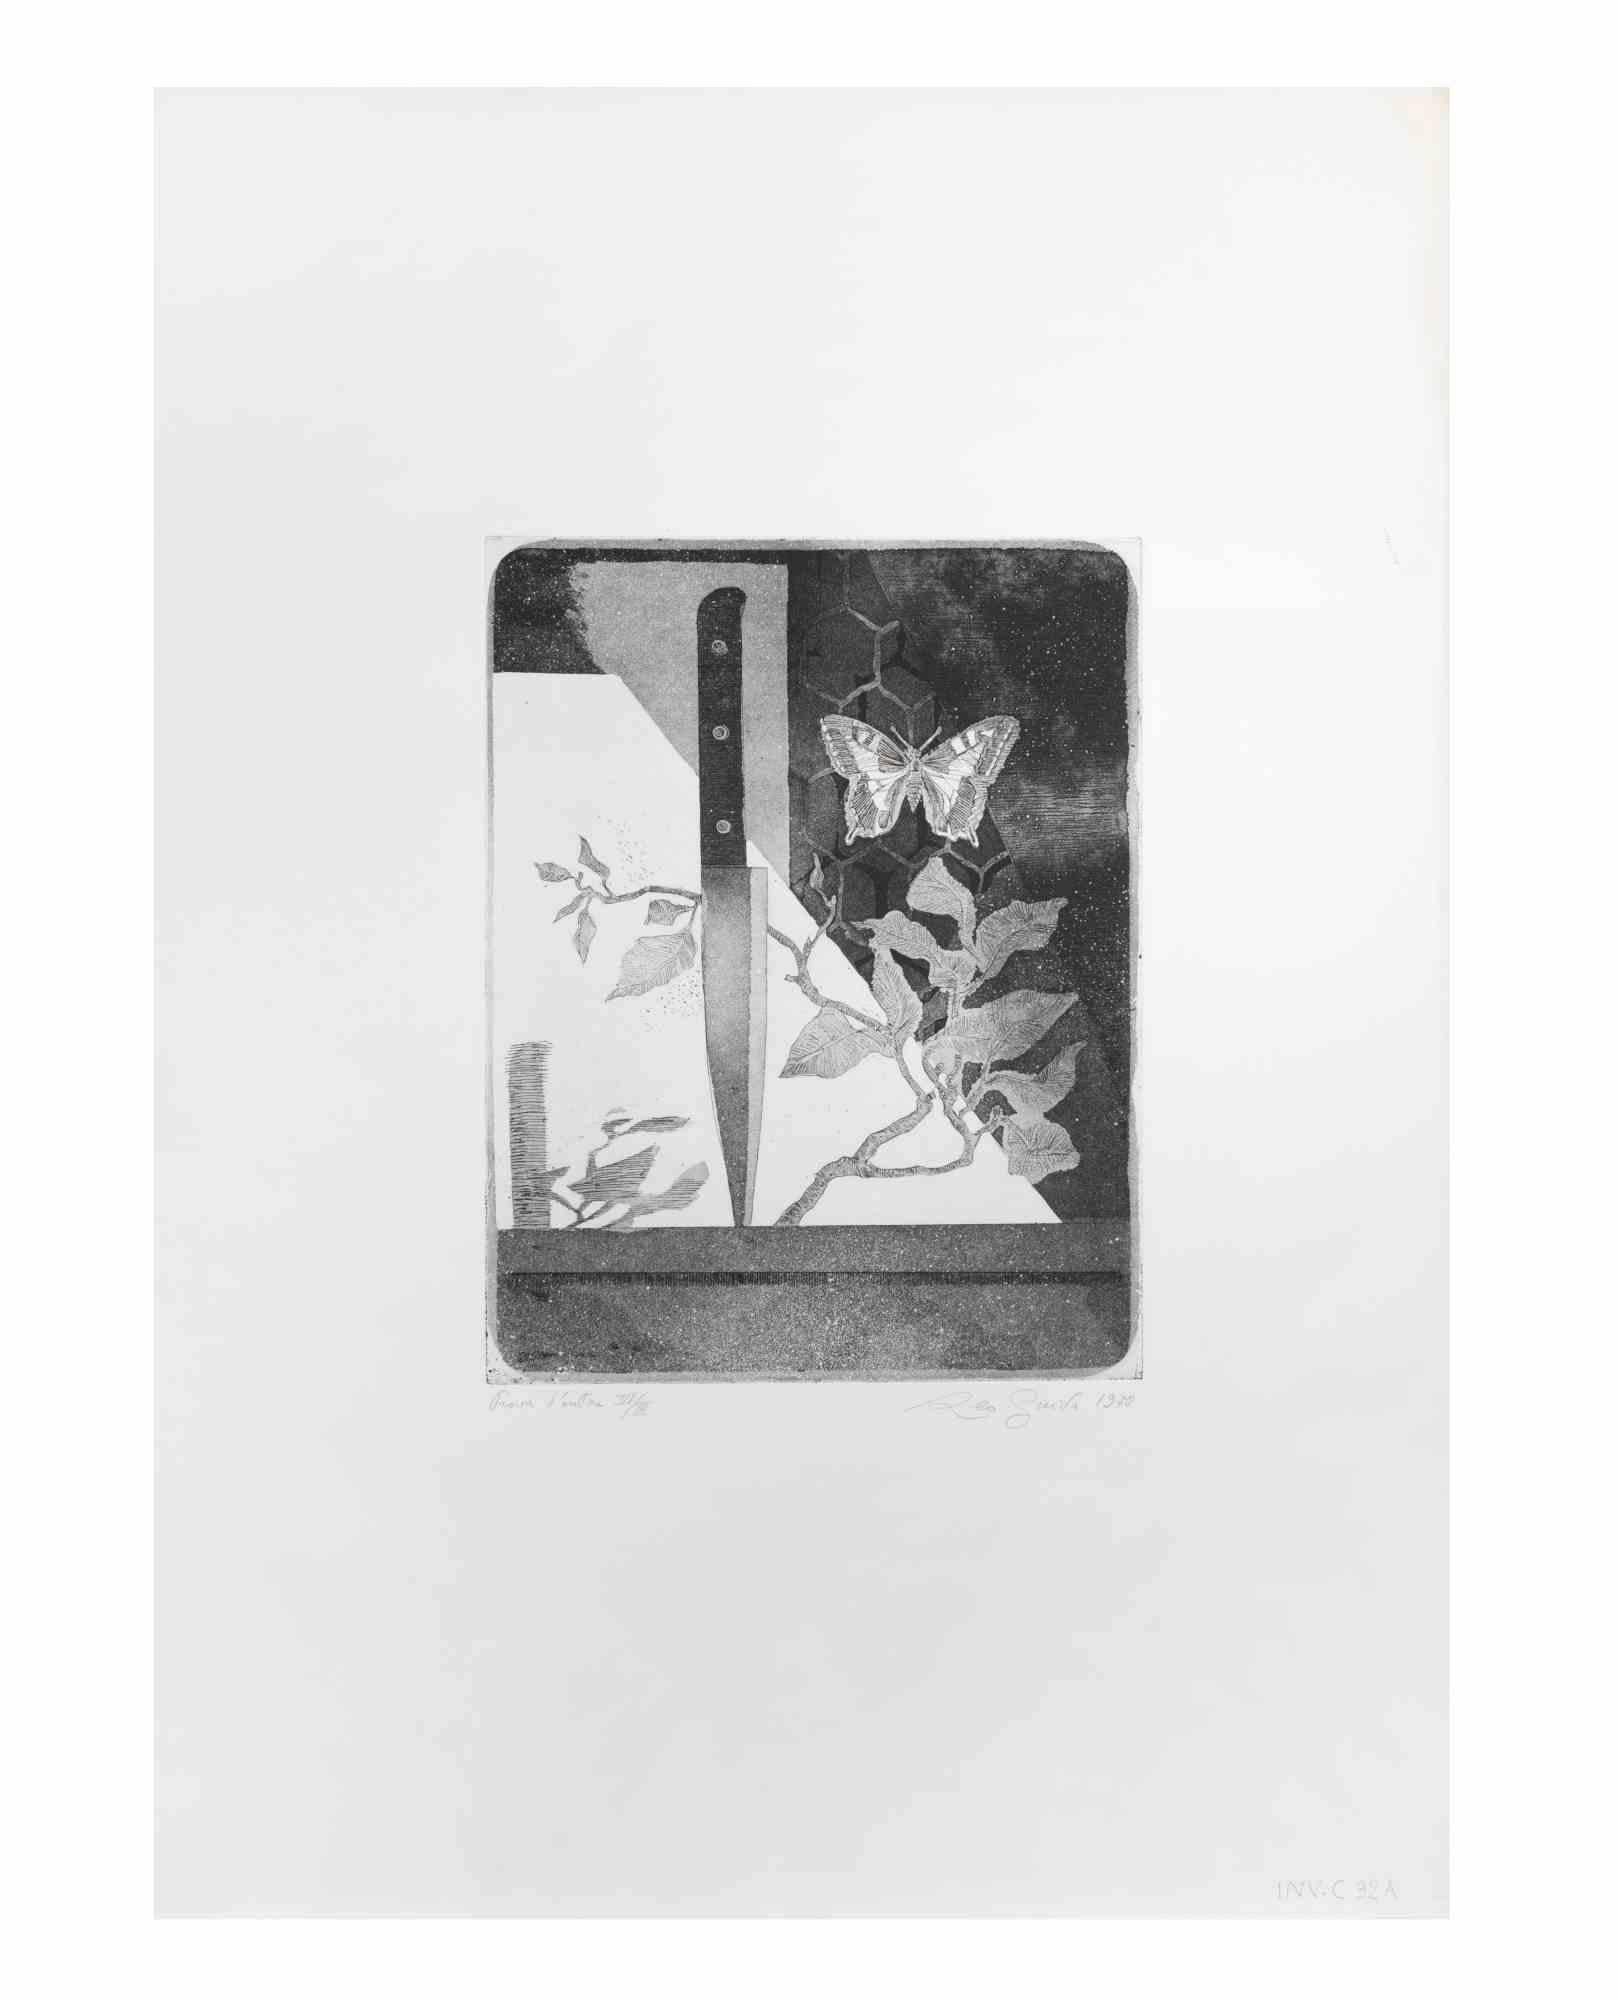 The knife and butterfly is an etching print realized by Leo Guida in the 1970s.

Hand-signed and dated on the lower right, the artist's proof, on the lower left.

Good condition with slight foxing.

 

Leo Guida  (1992 - 2017). Sensitive to current